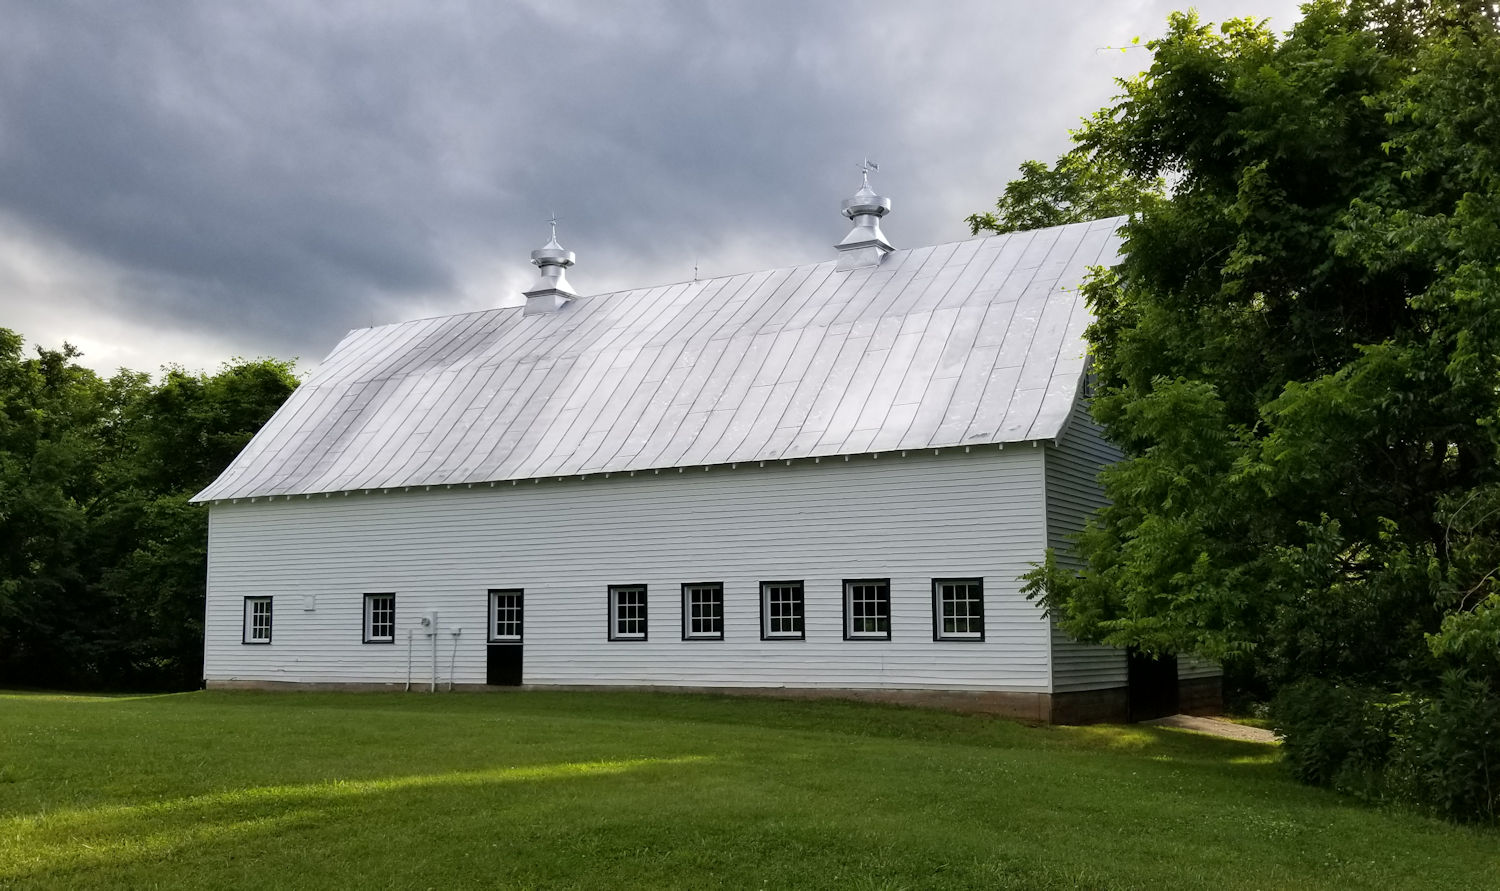 Barn with clouds